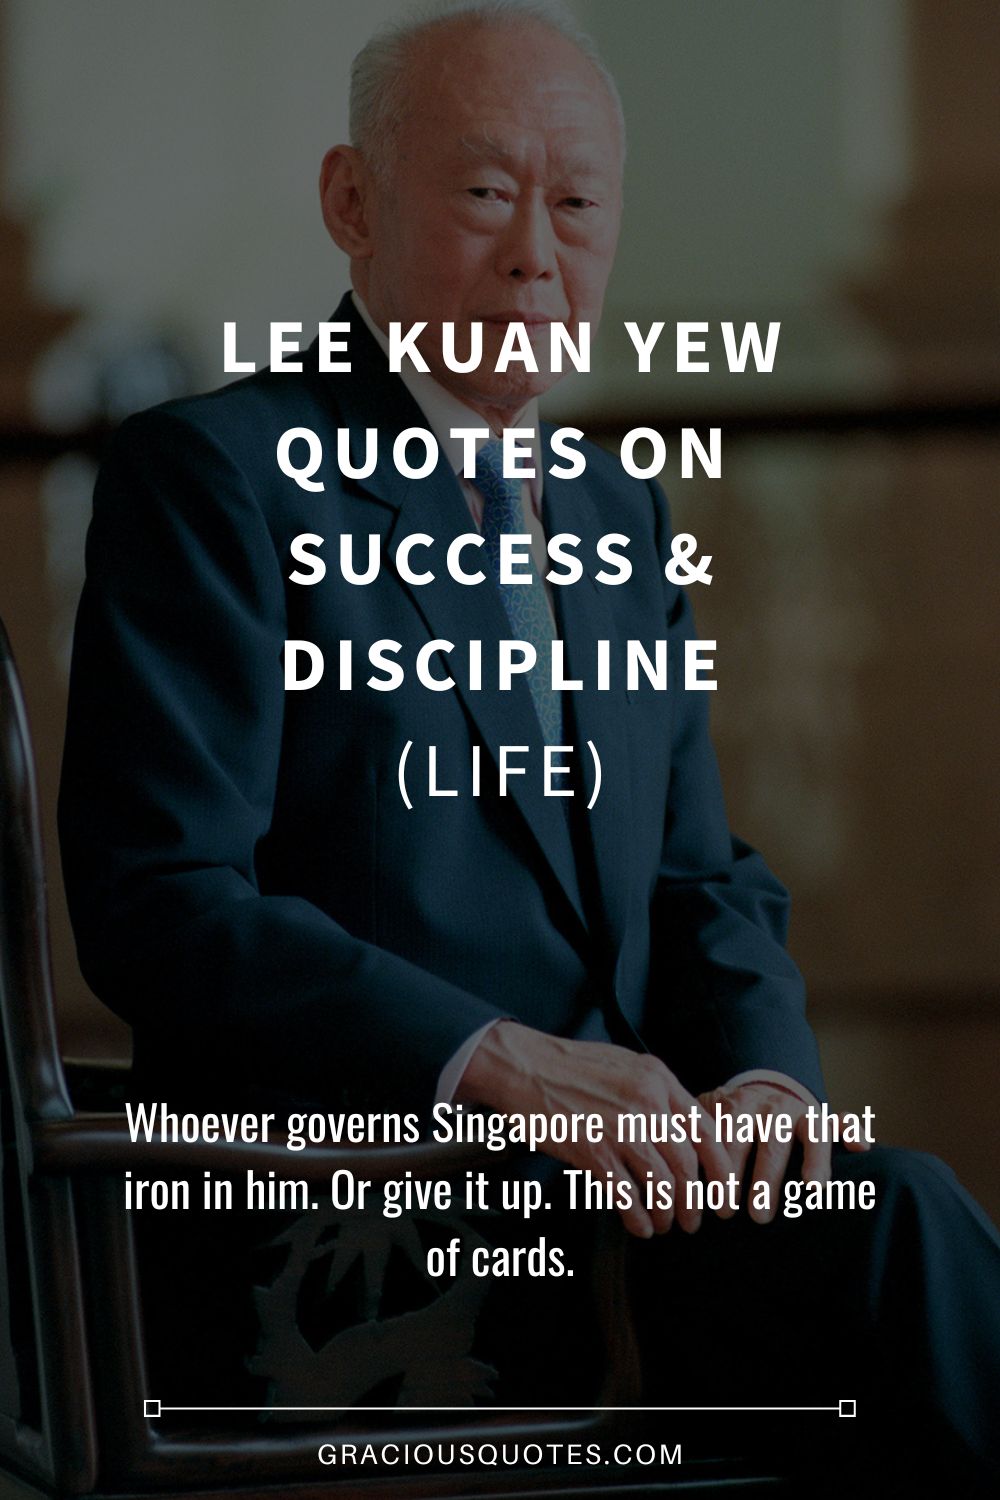 Lee Kuan Yew Quotes on Success & Discipline (LIFE) - Gracious Quotes